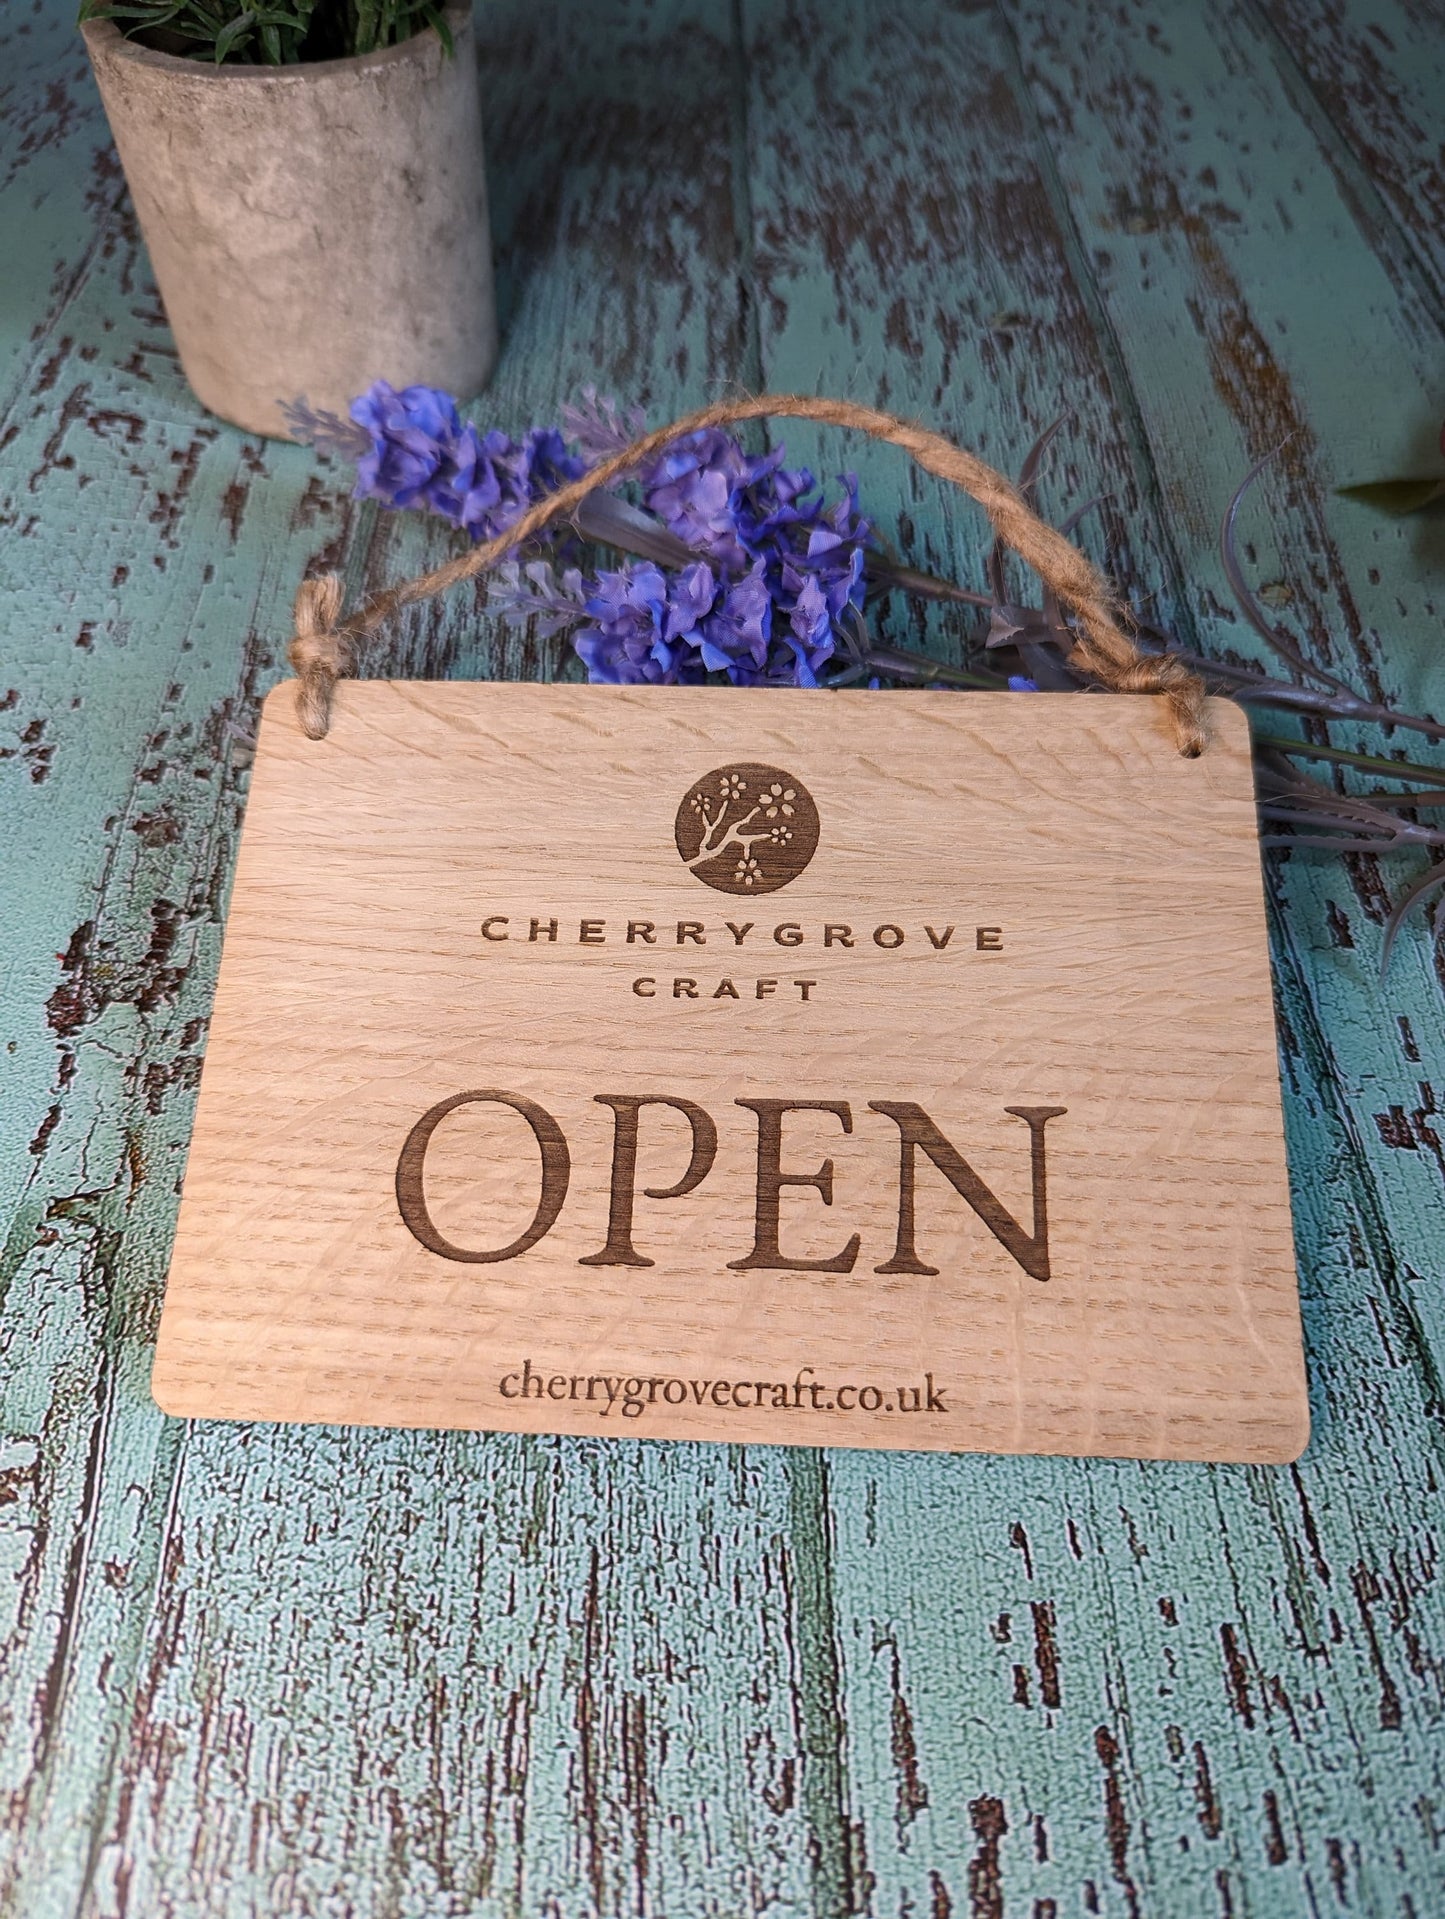 Personalised Wooden Open and Closed Sign for Business - Eco-friendly 2 Sided Oak Veneered MDF with Rustic String for Hanging